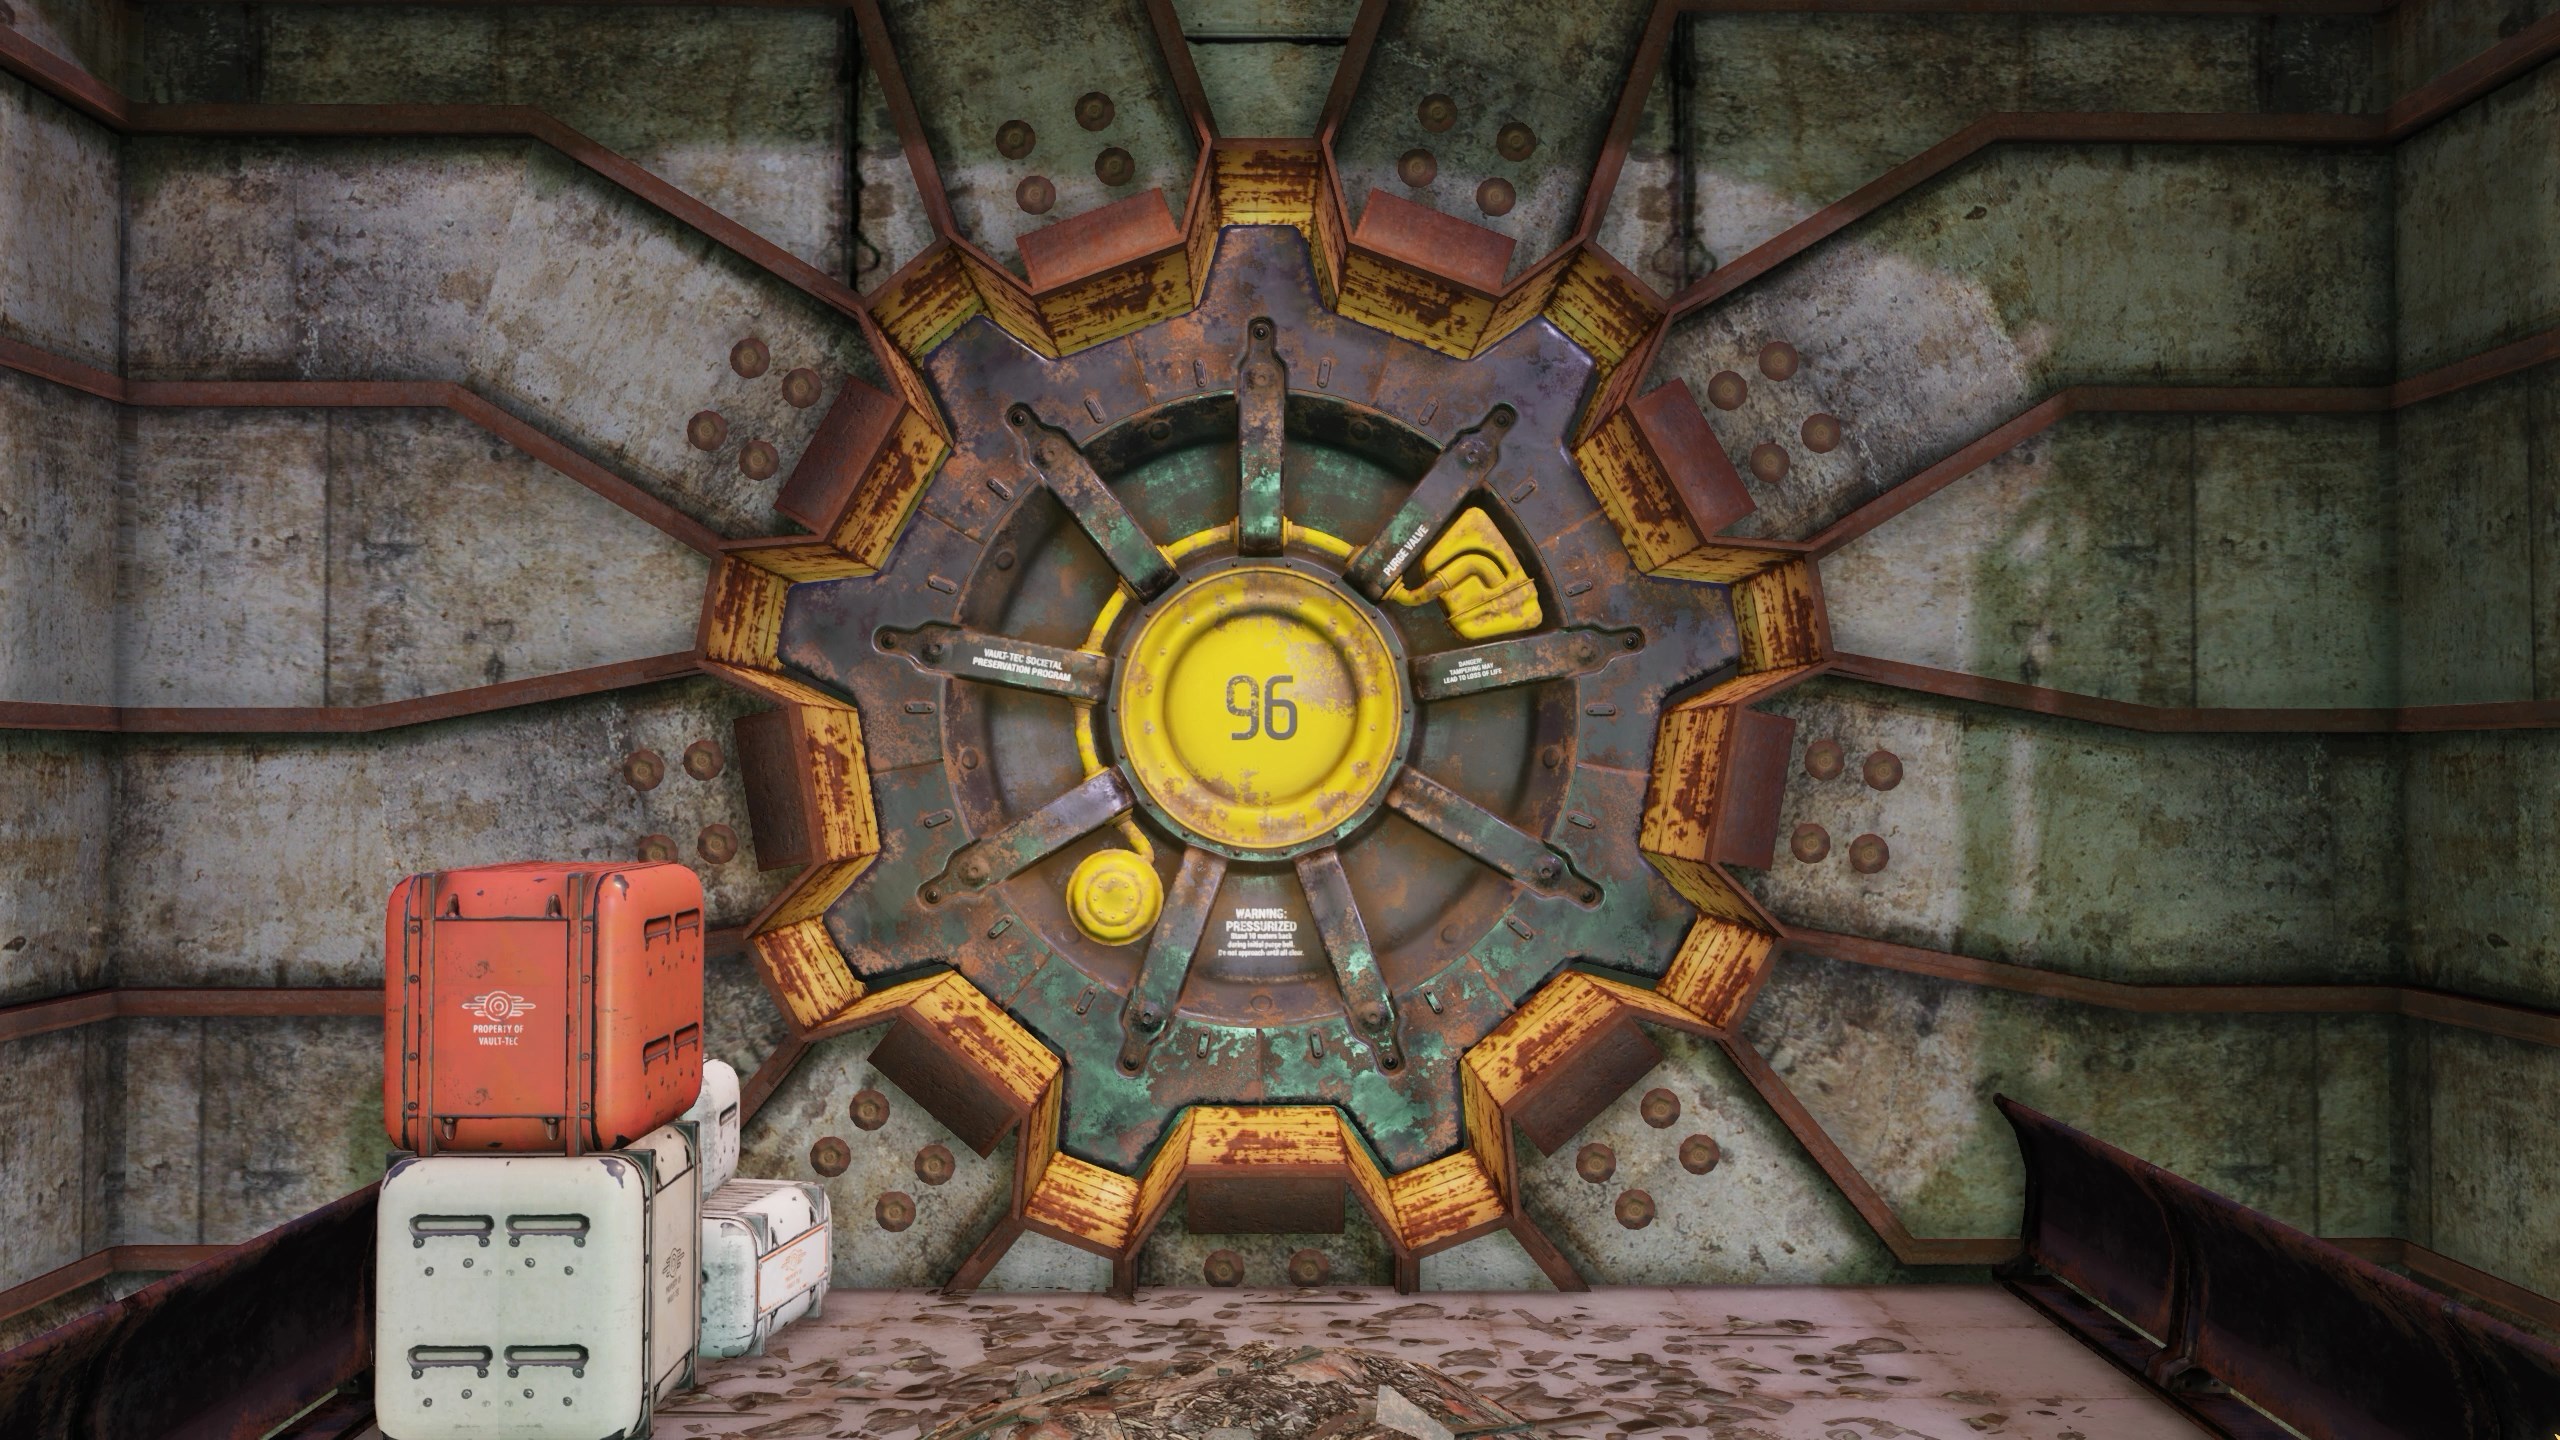 fallout-76-vault-location-guide-here-s-where-to-find-vaults-94-96